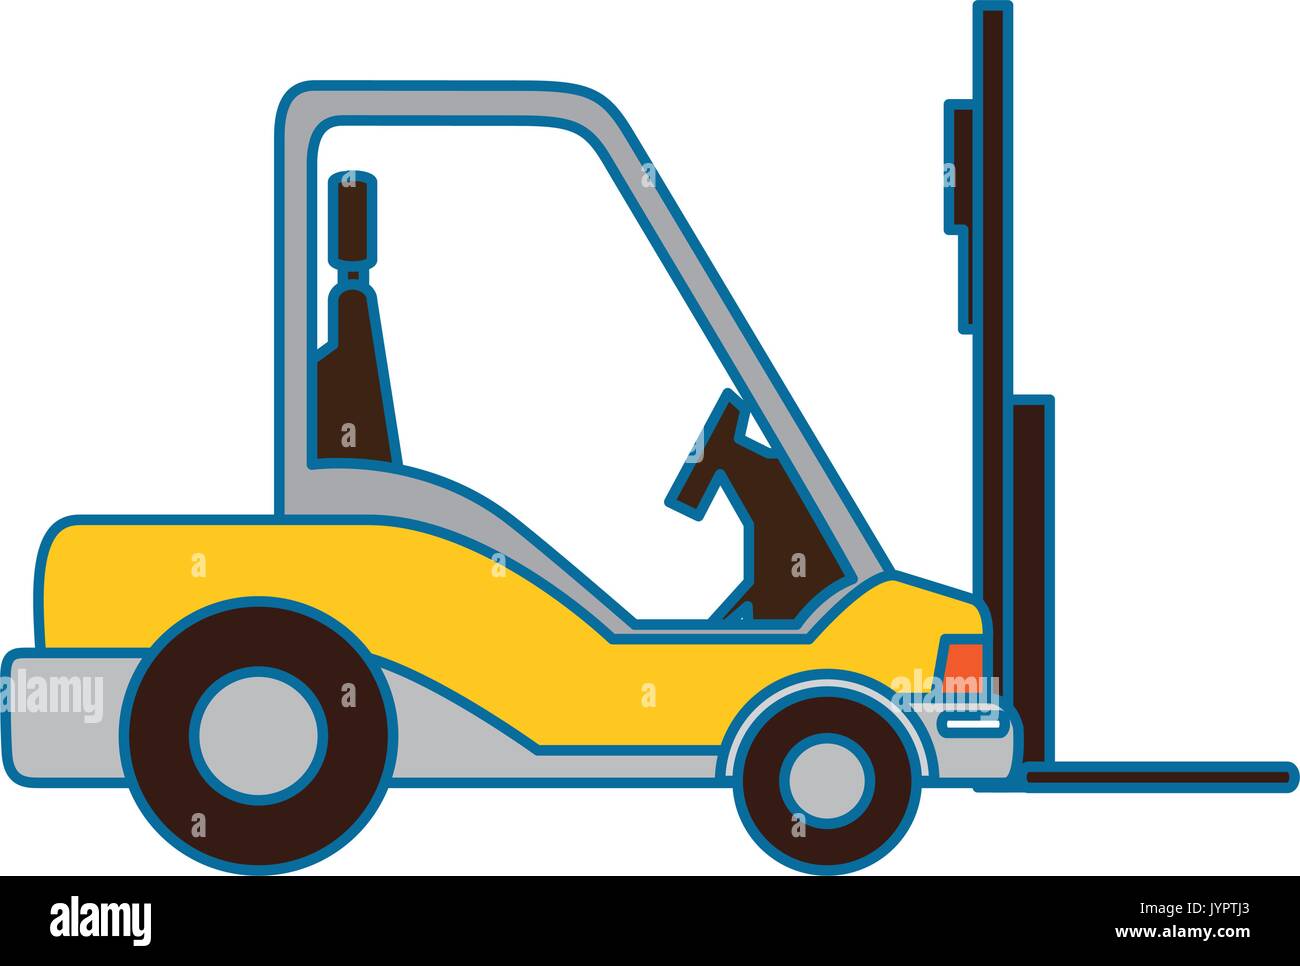 forklift truck icon Stock Vector